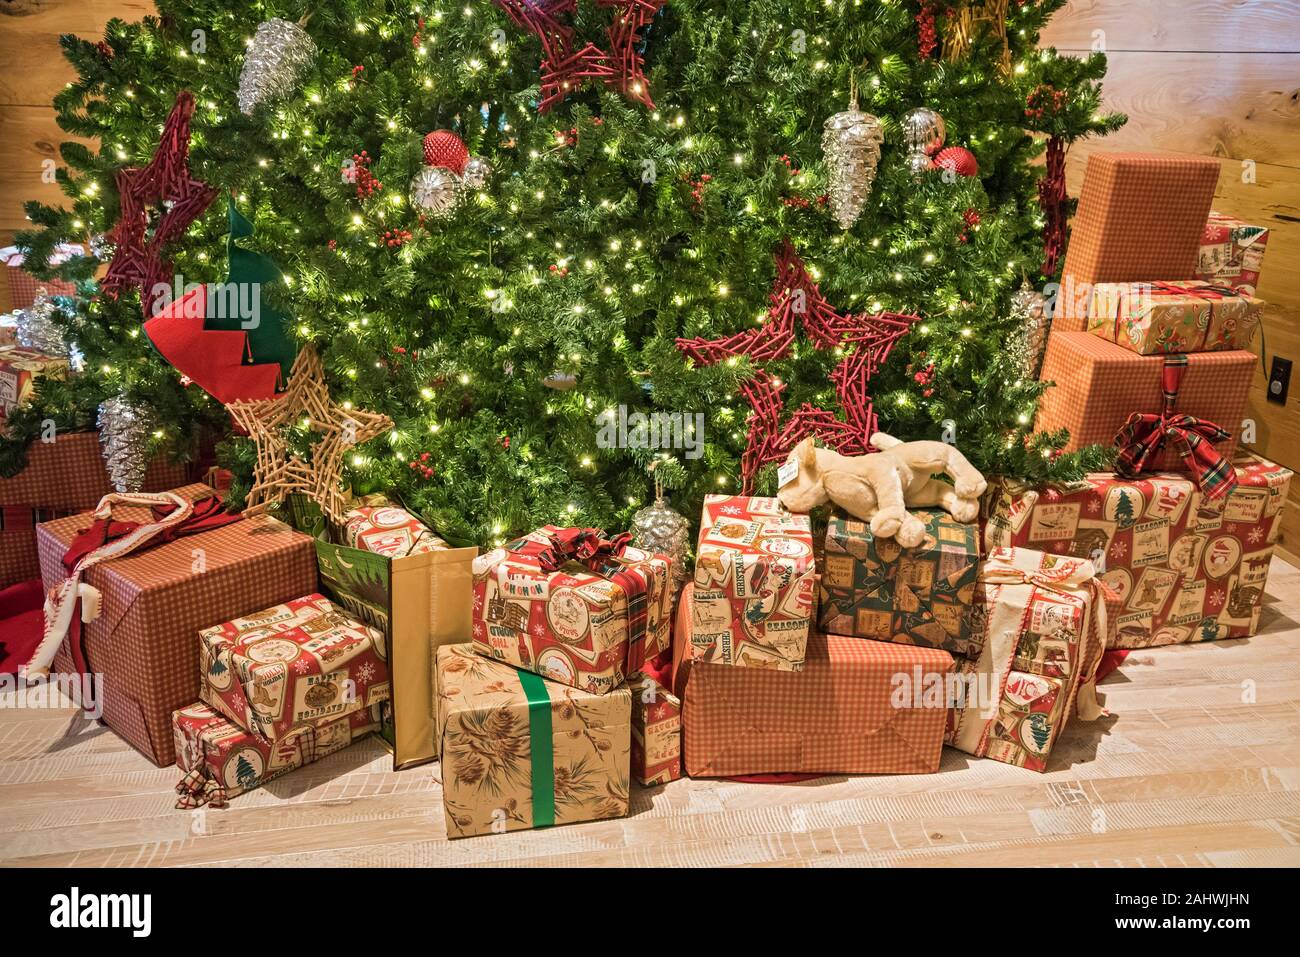 Christmas decorations and gifts under a large Christmas tree. Stock Photo